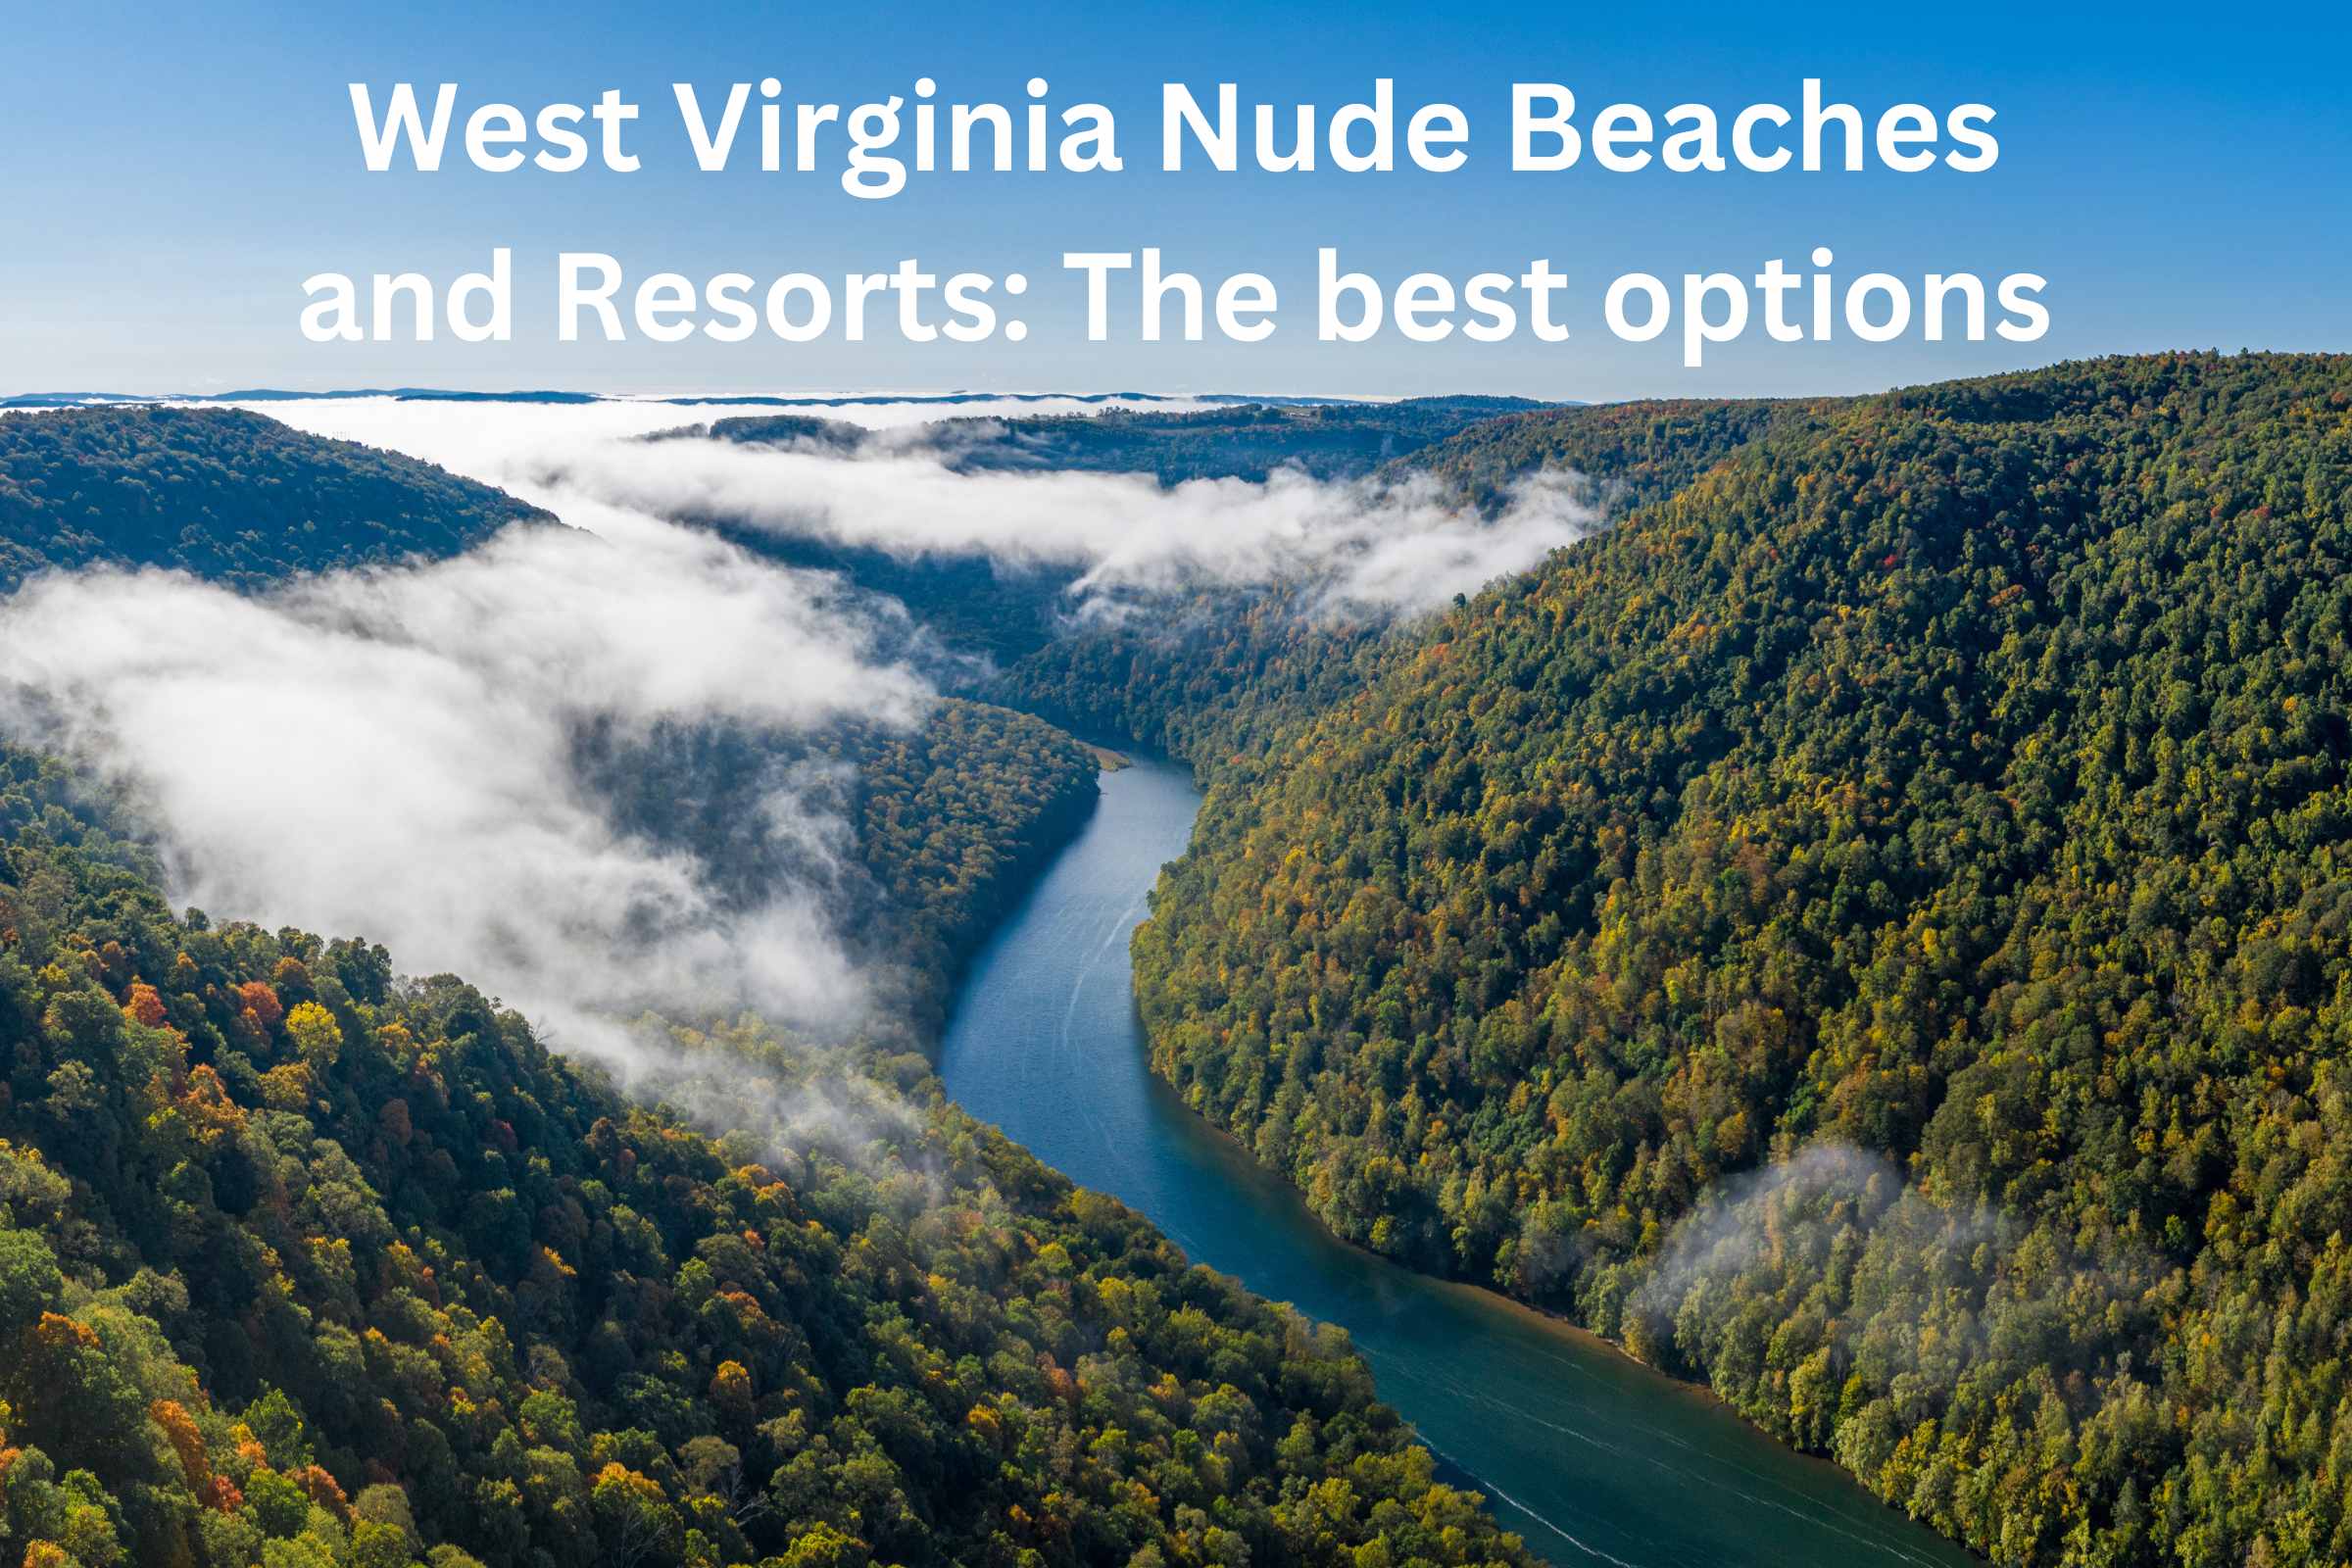 2023 West Virginia Nude Beaches and Resorts The best options image